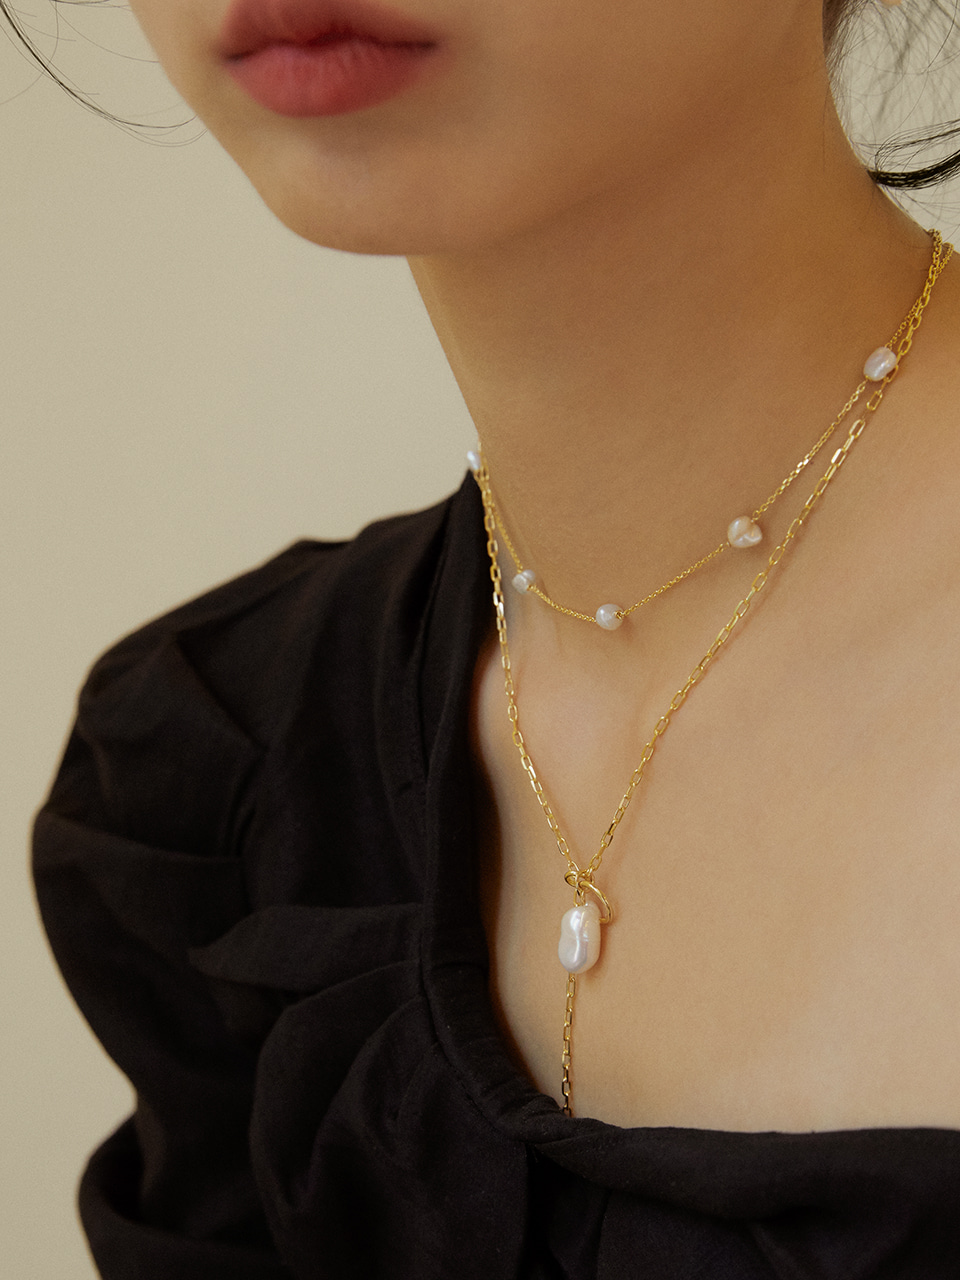 Ring&amp;pearl necklace(링&amp;펄목걸이)